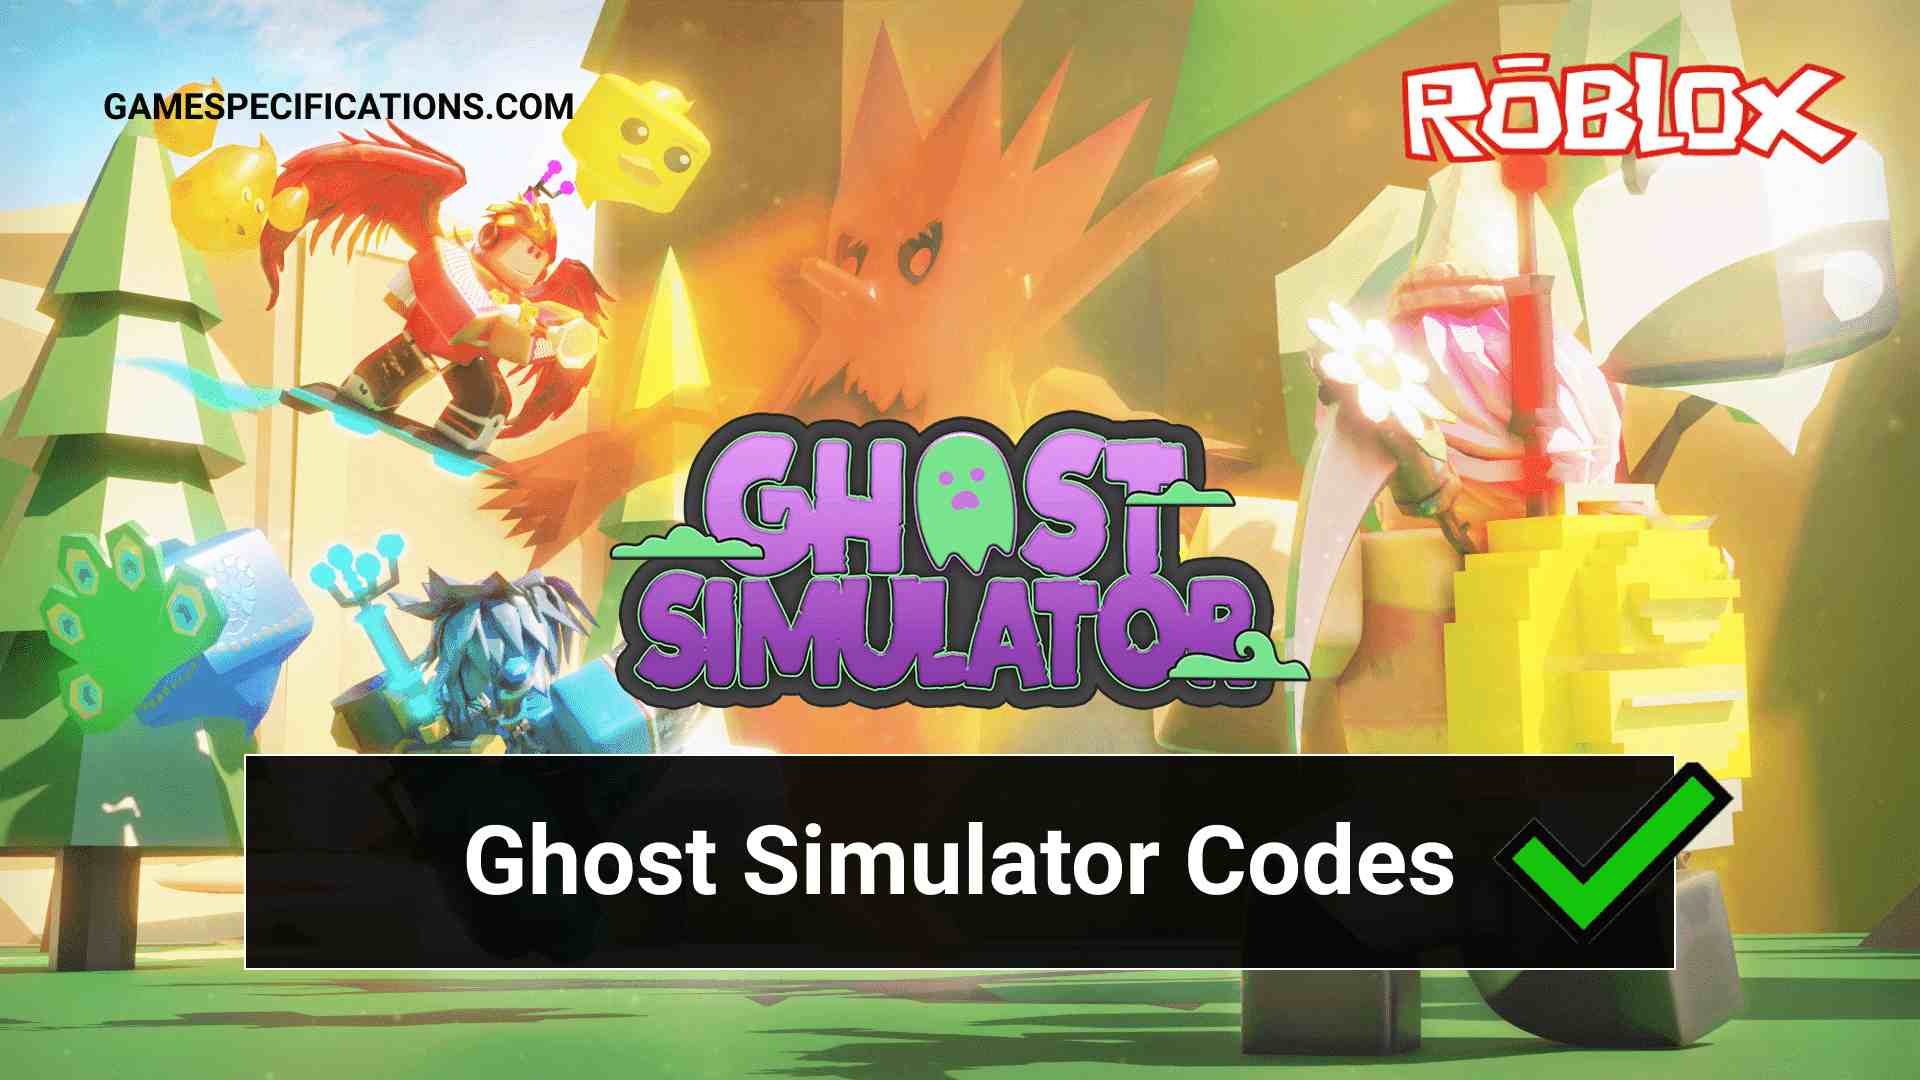 55 Roblox Ghost Simulator Codes To Get Free Rewards July 2021 Game Specifications - ghost simulator roblox codes